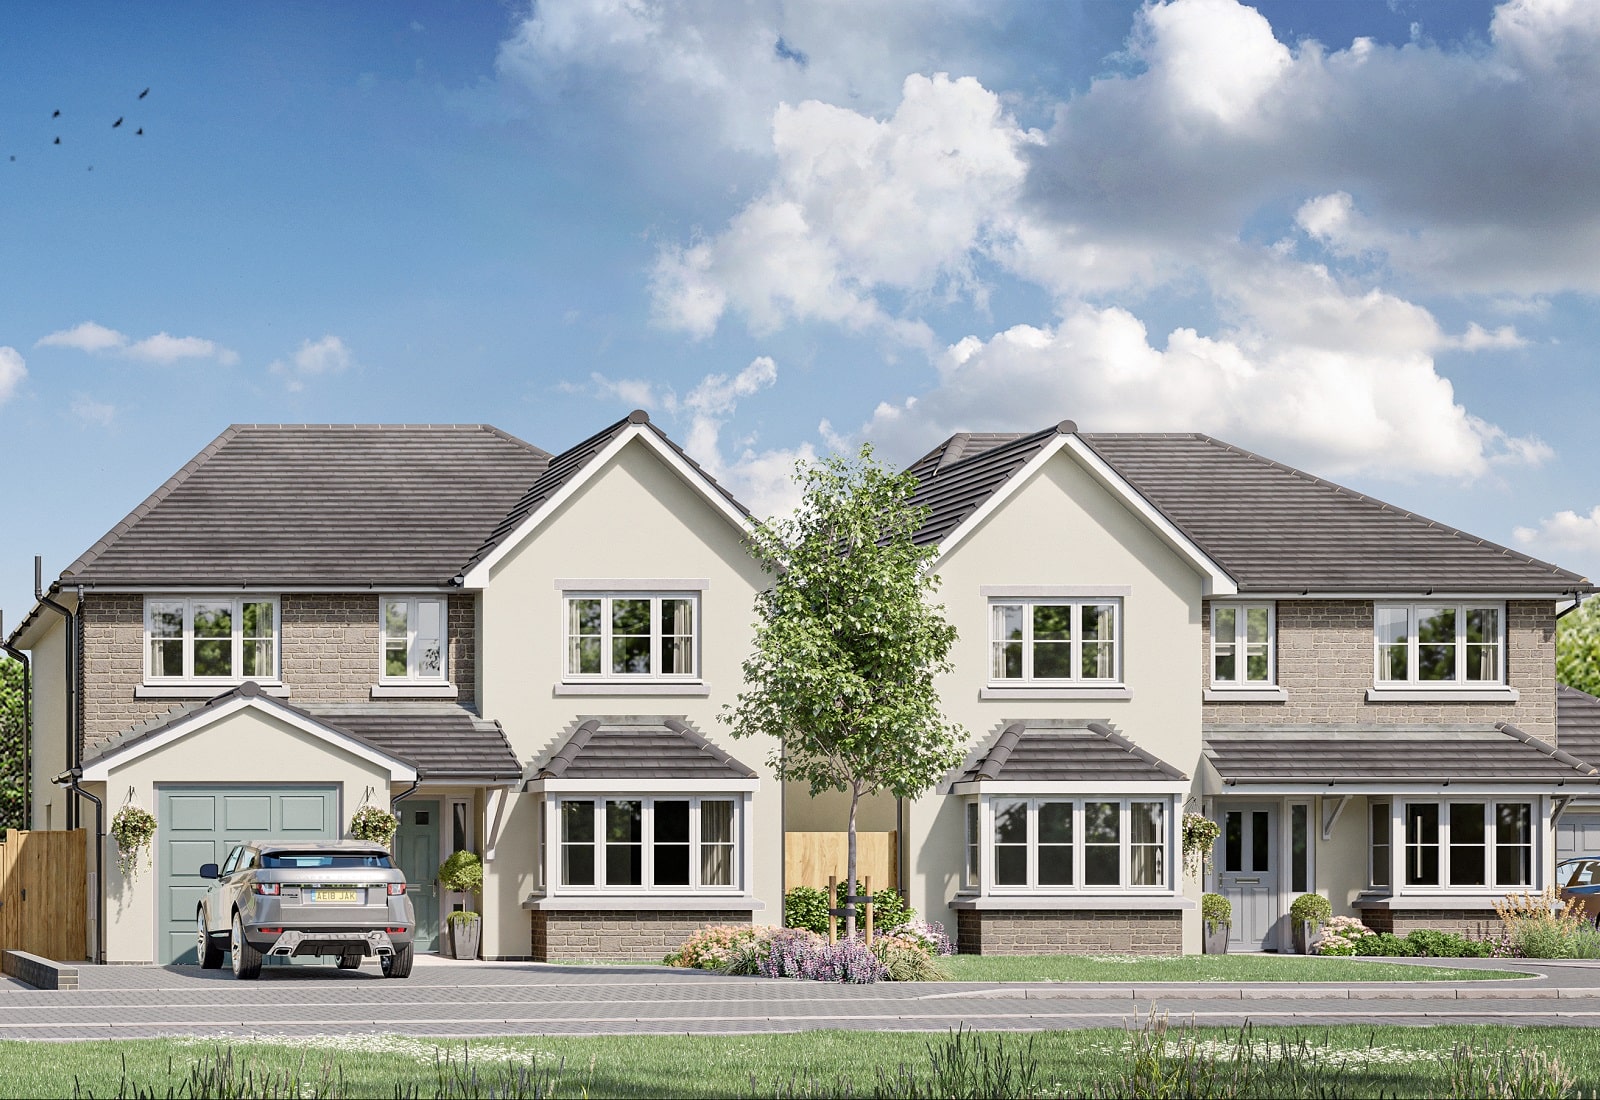 Launch event planned for new 29-home development in Lake District village